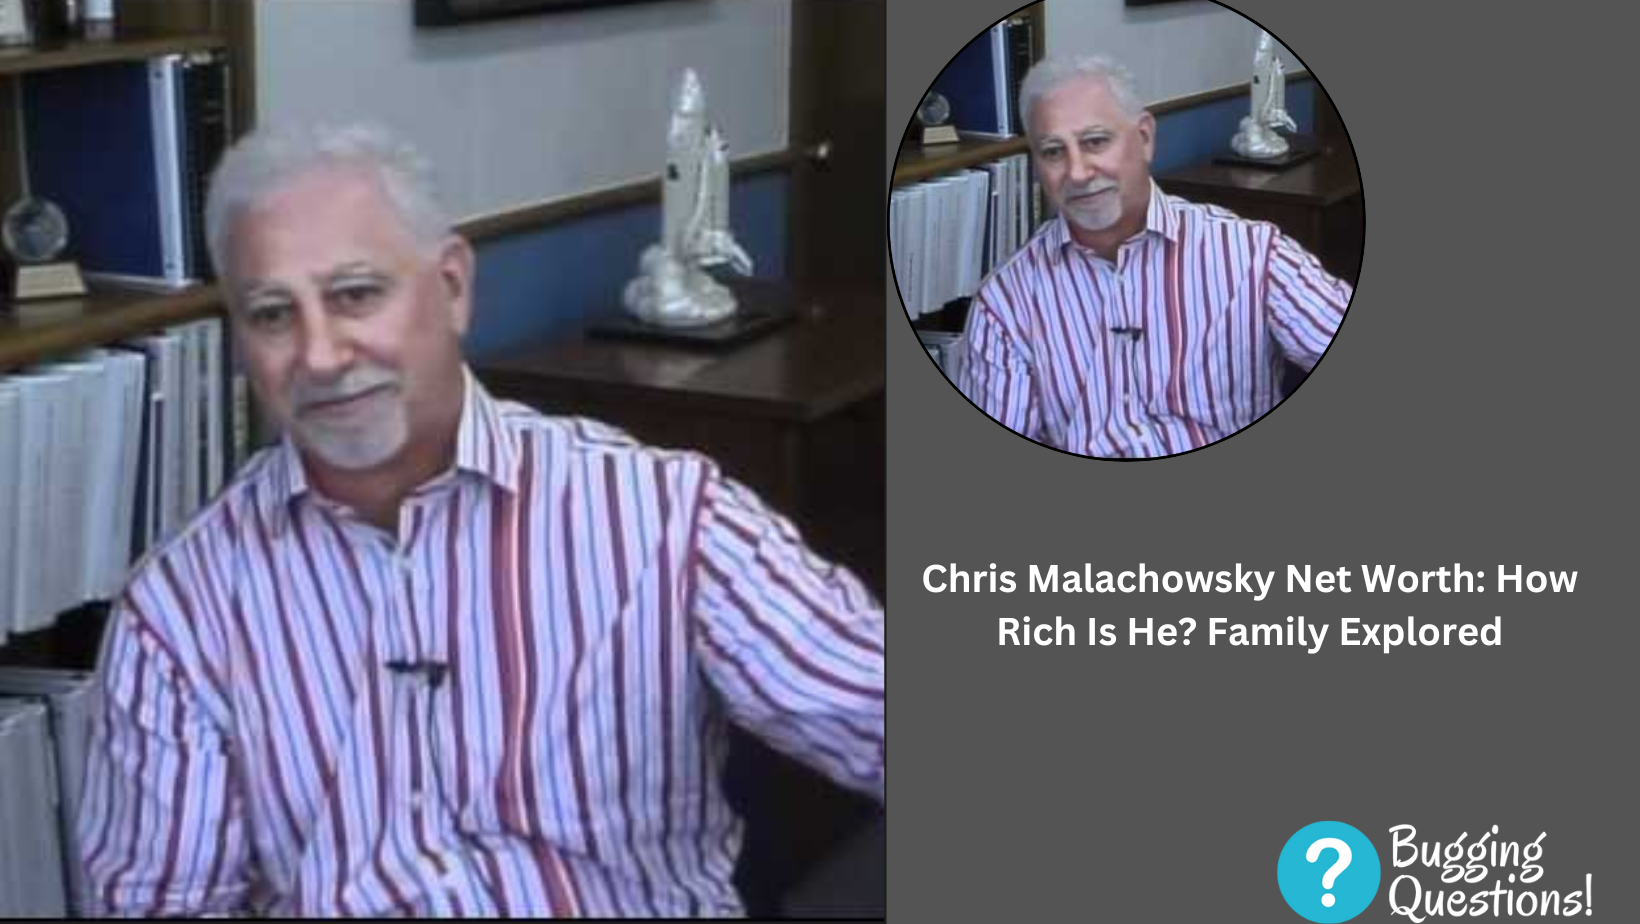 Chris Malachowsky Net Worth How Rich Is He? Family Explored Bugging